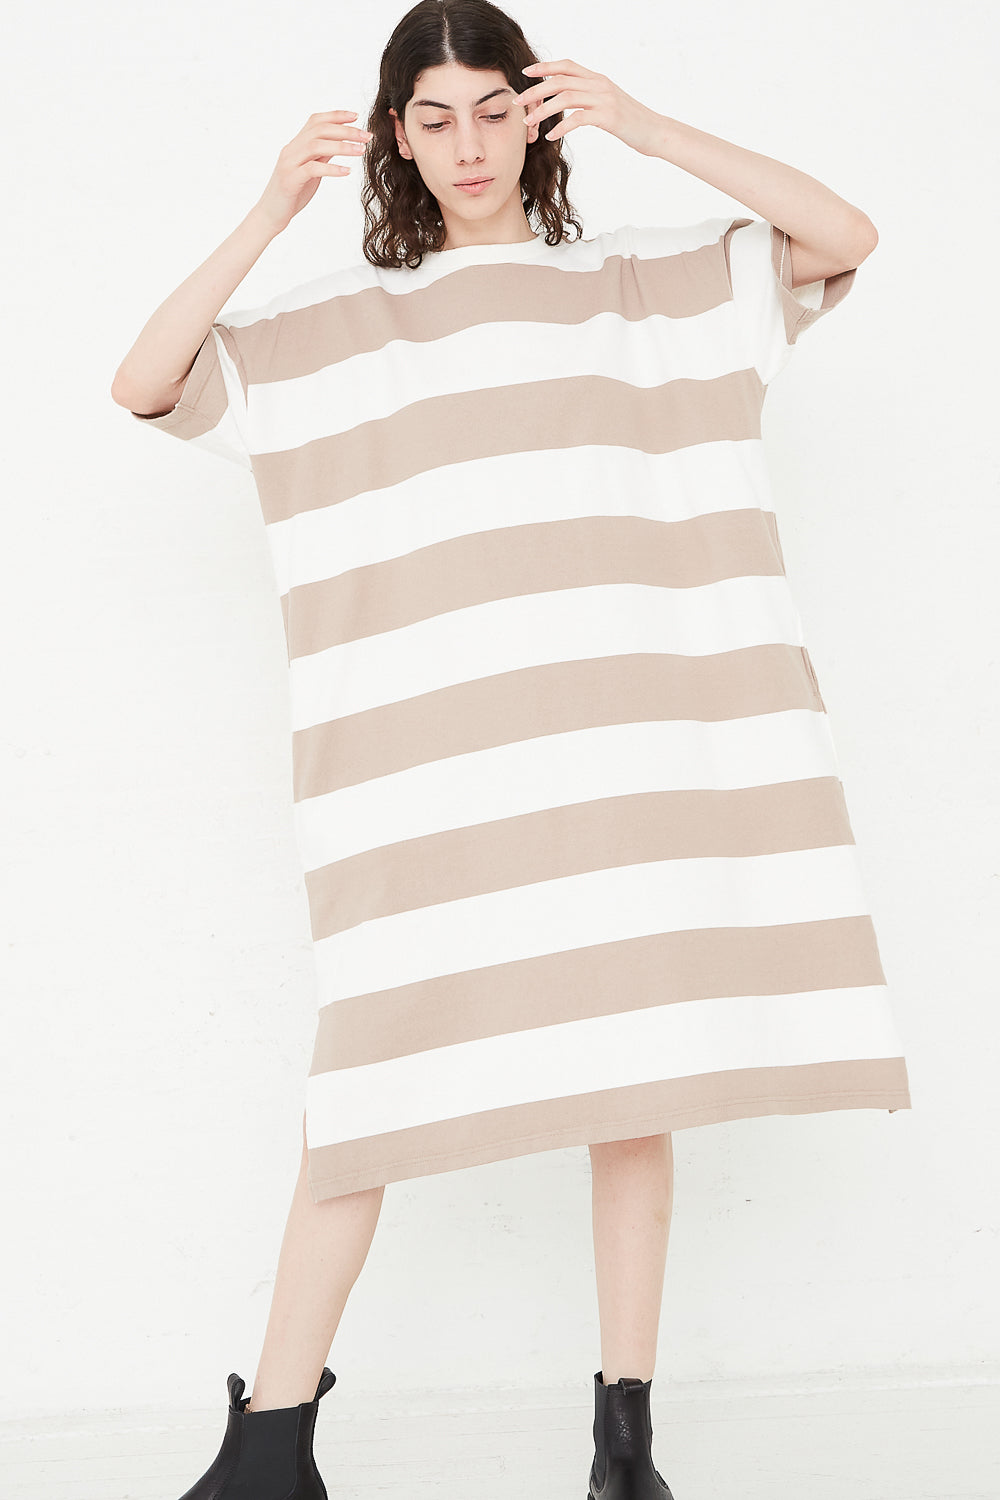 Cotton Dress in White/Beige front view